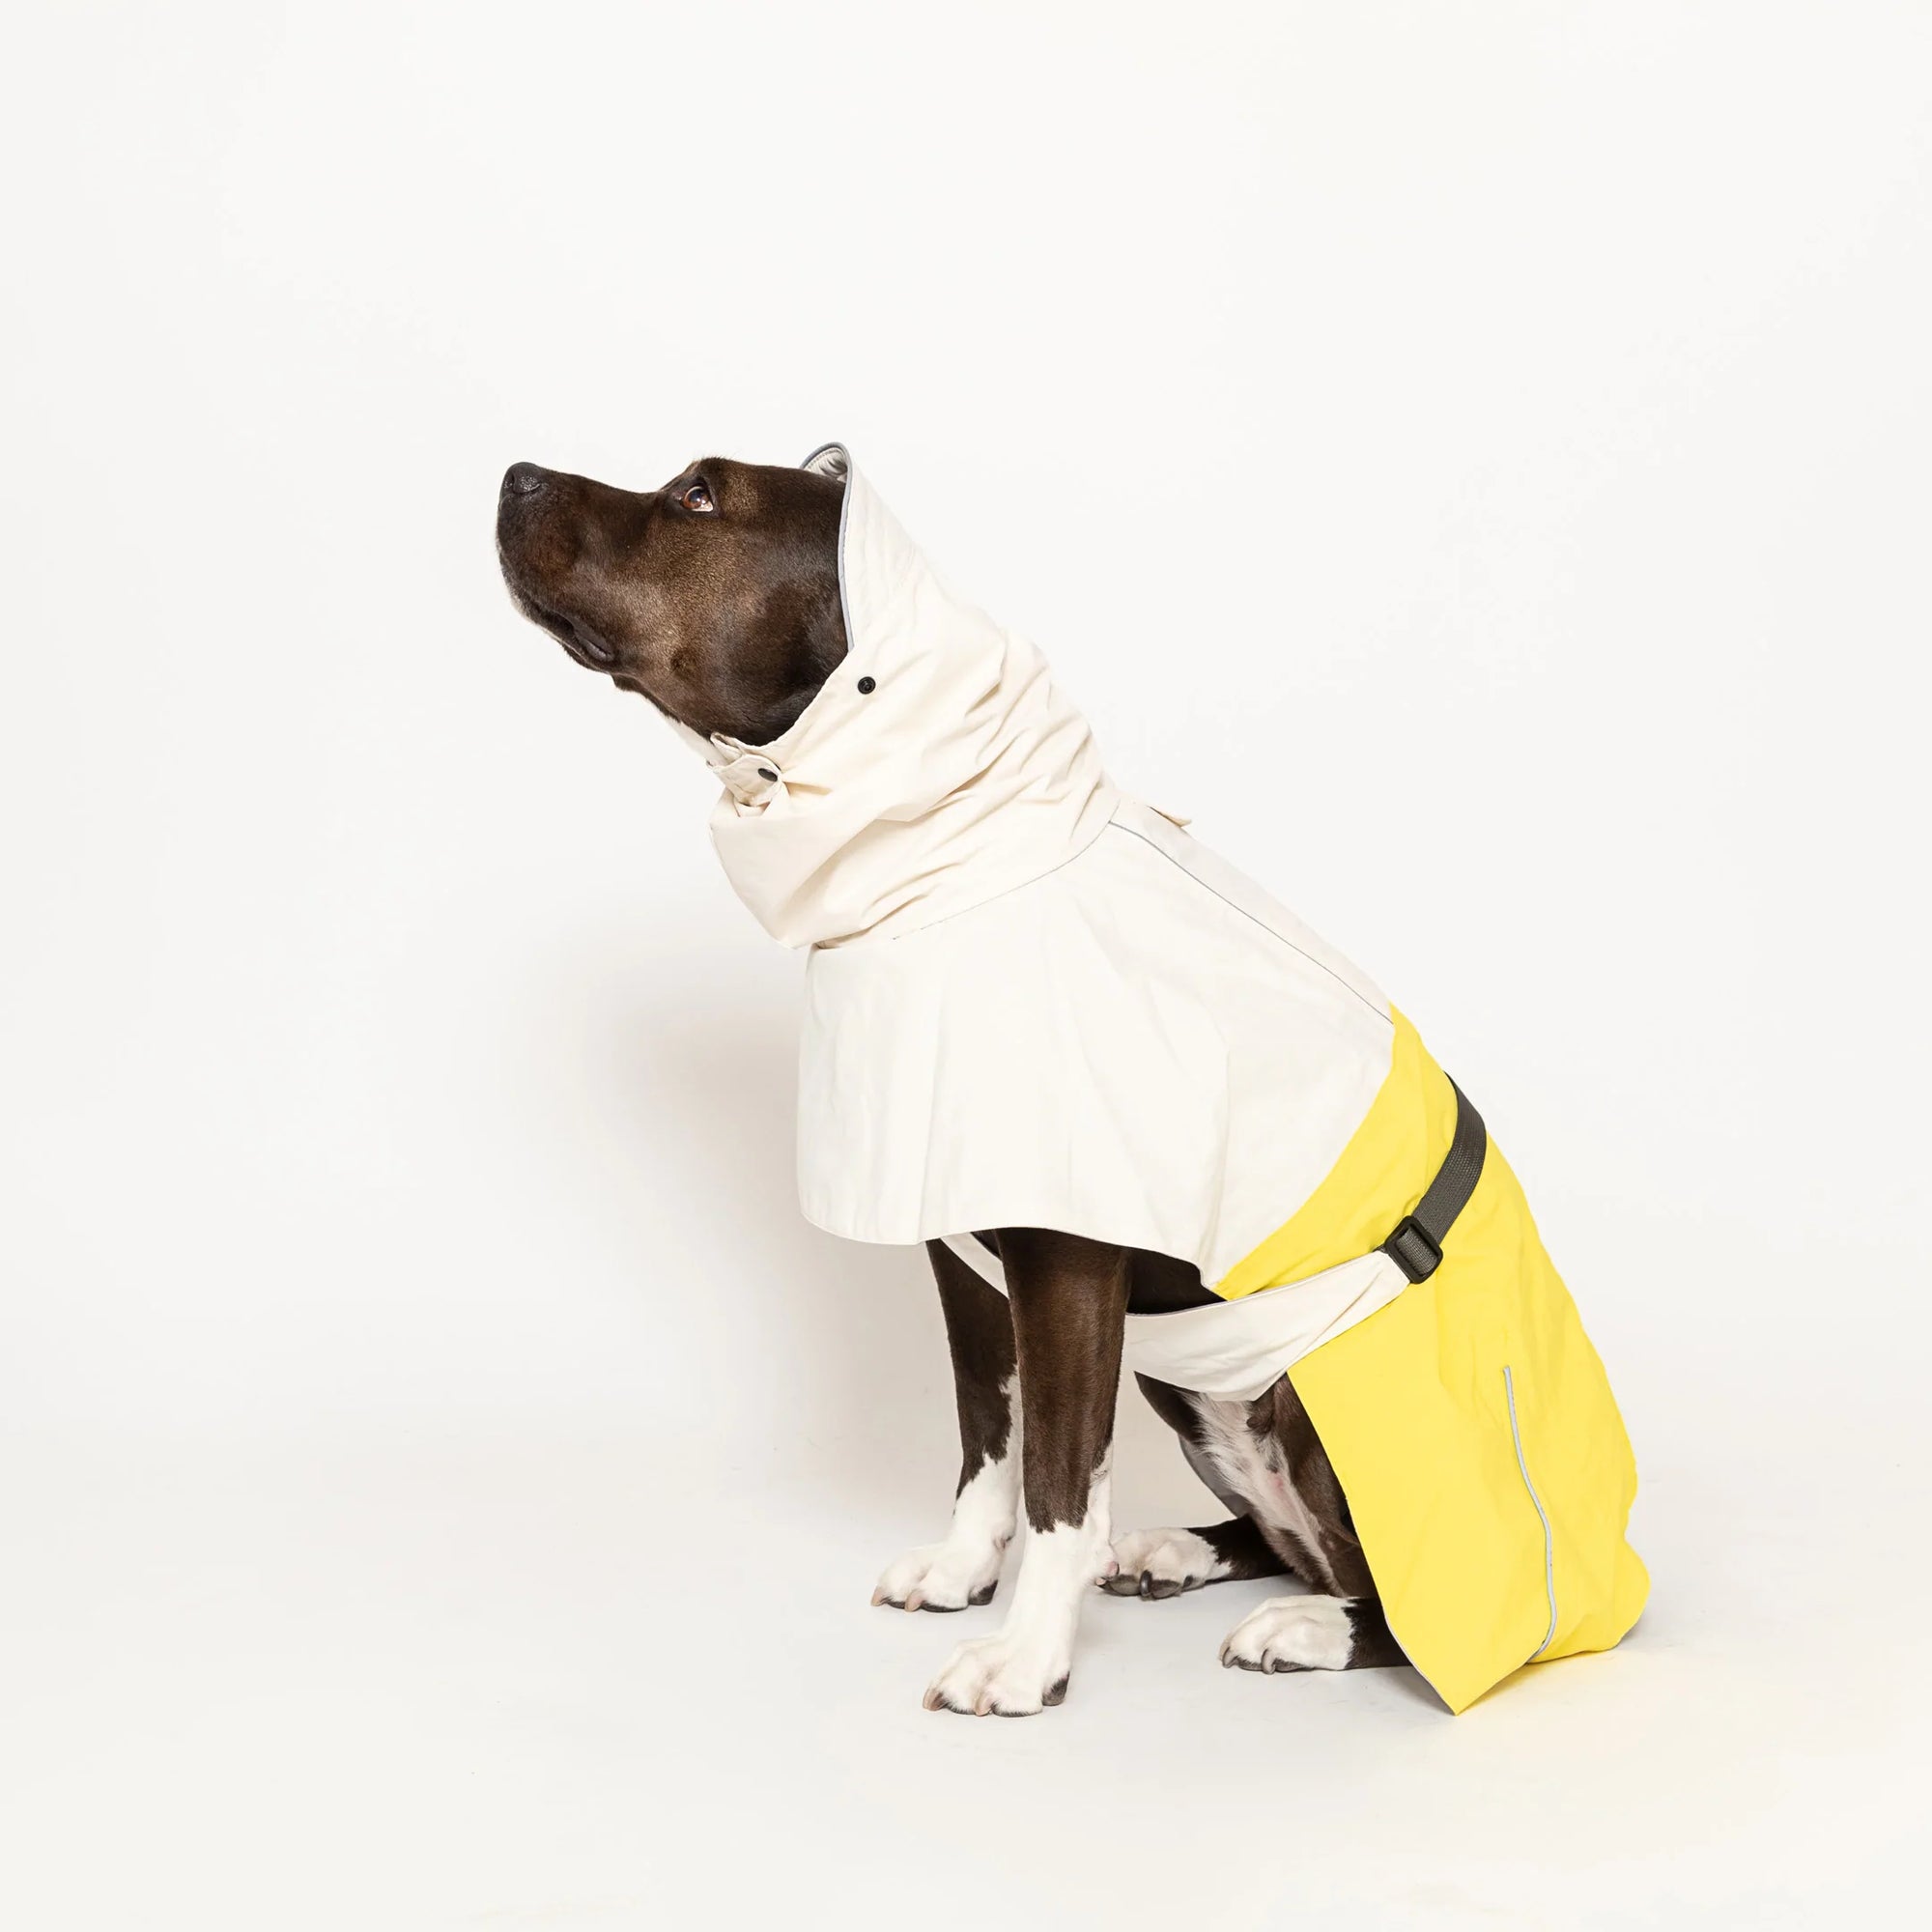 Brown dog with a smart cream and yellow raincoat looking up.